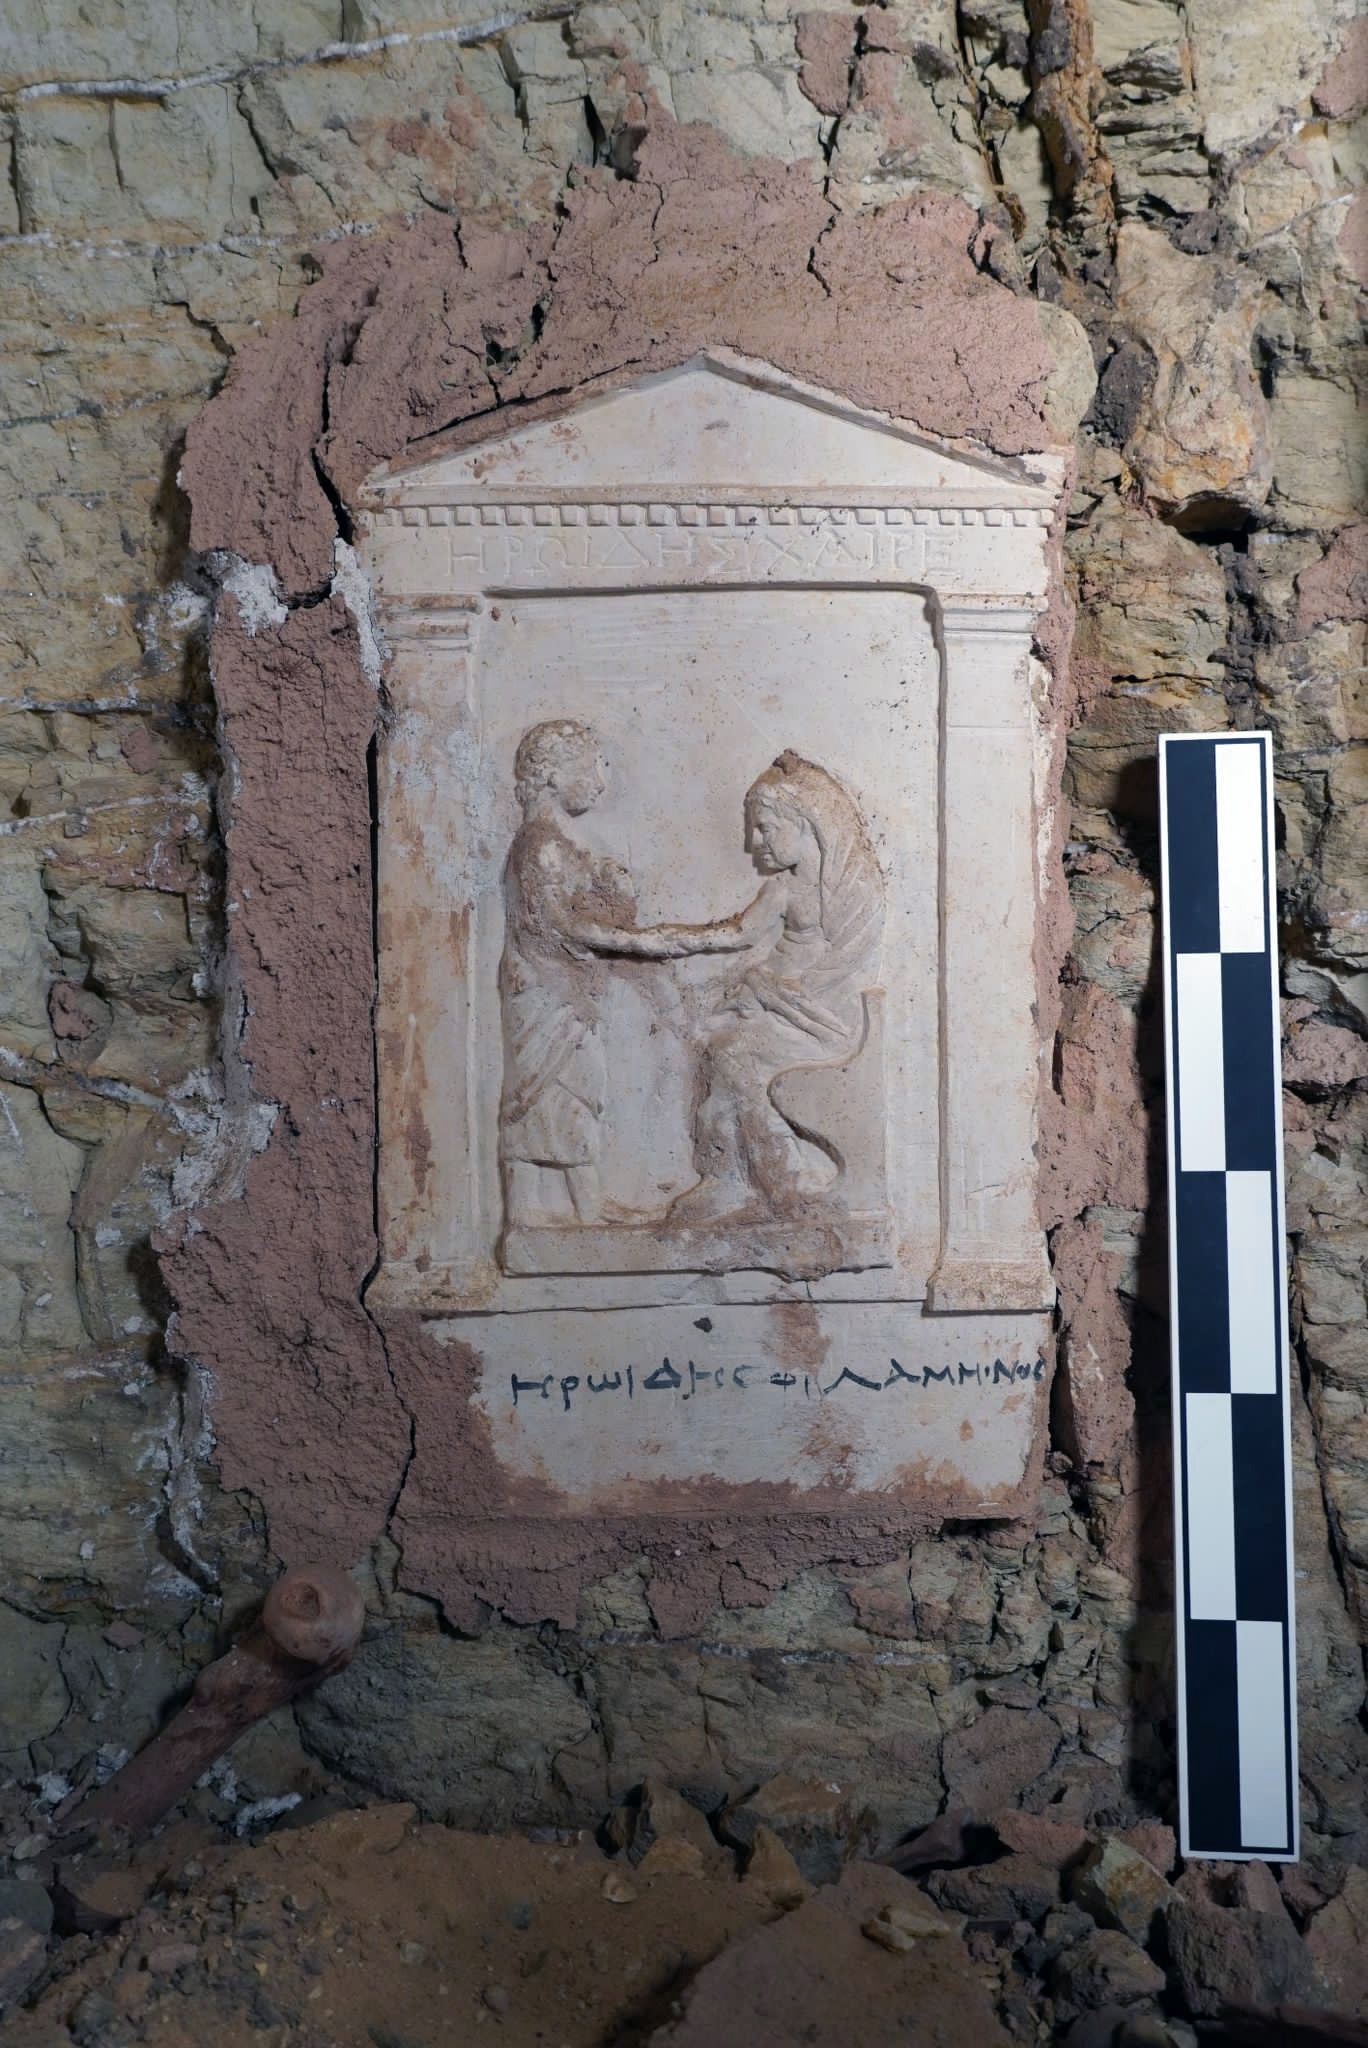 An artefact at the burial site in Saqqara, Giza Governorate, Egypt, where a team discovered a Second Dynasty tomb and more artefacts at the Saqqara excavation site.